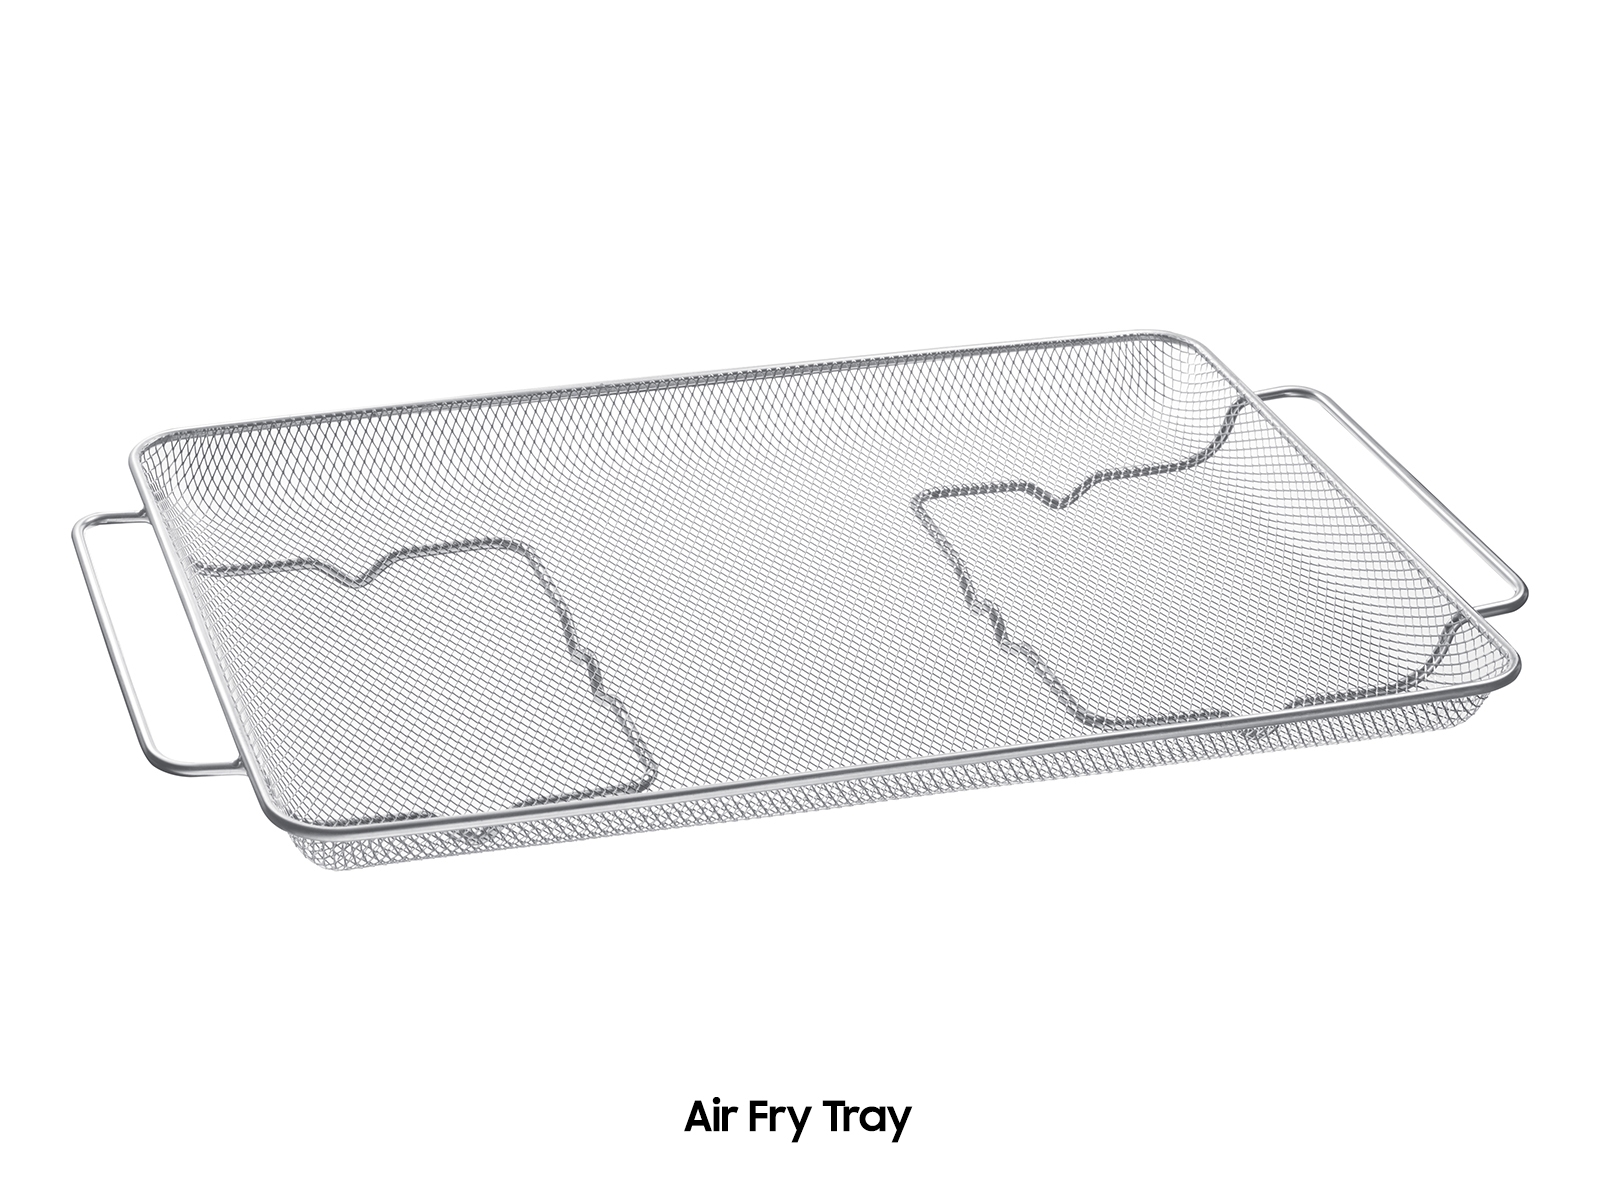 LG Large Capacity Stainless Steel Air Fryer Tray